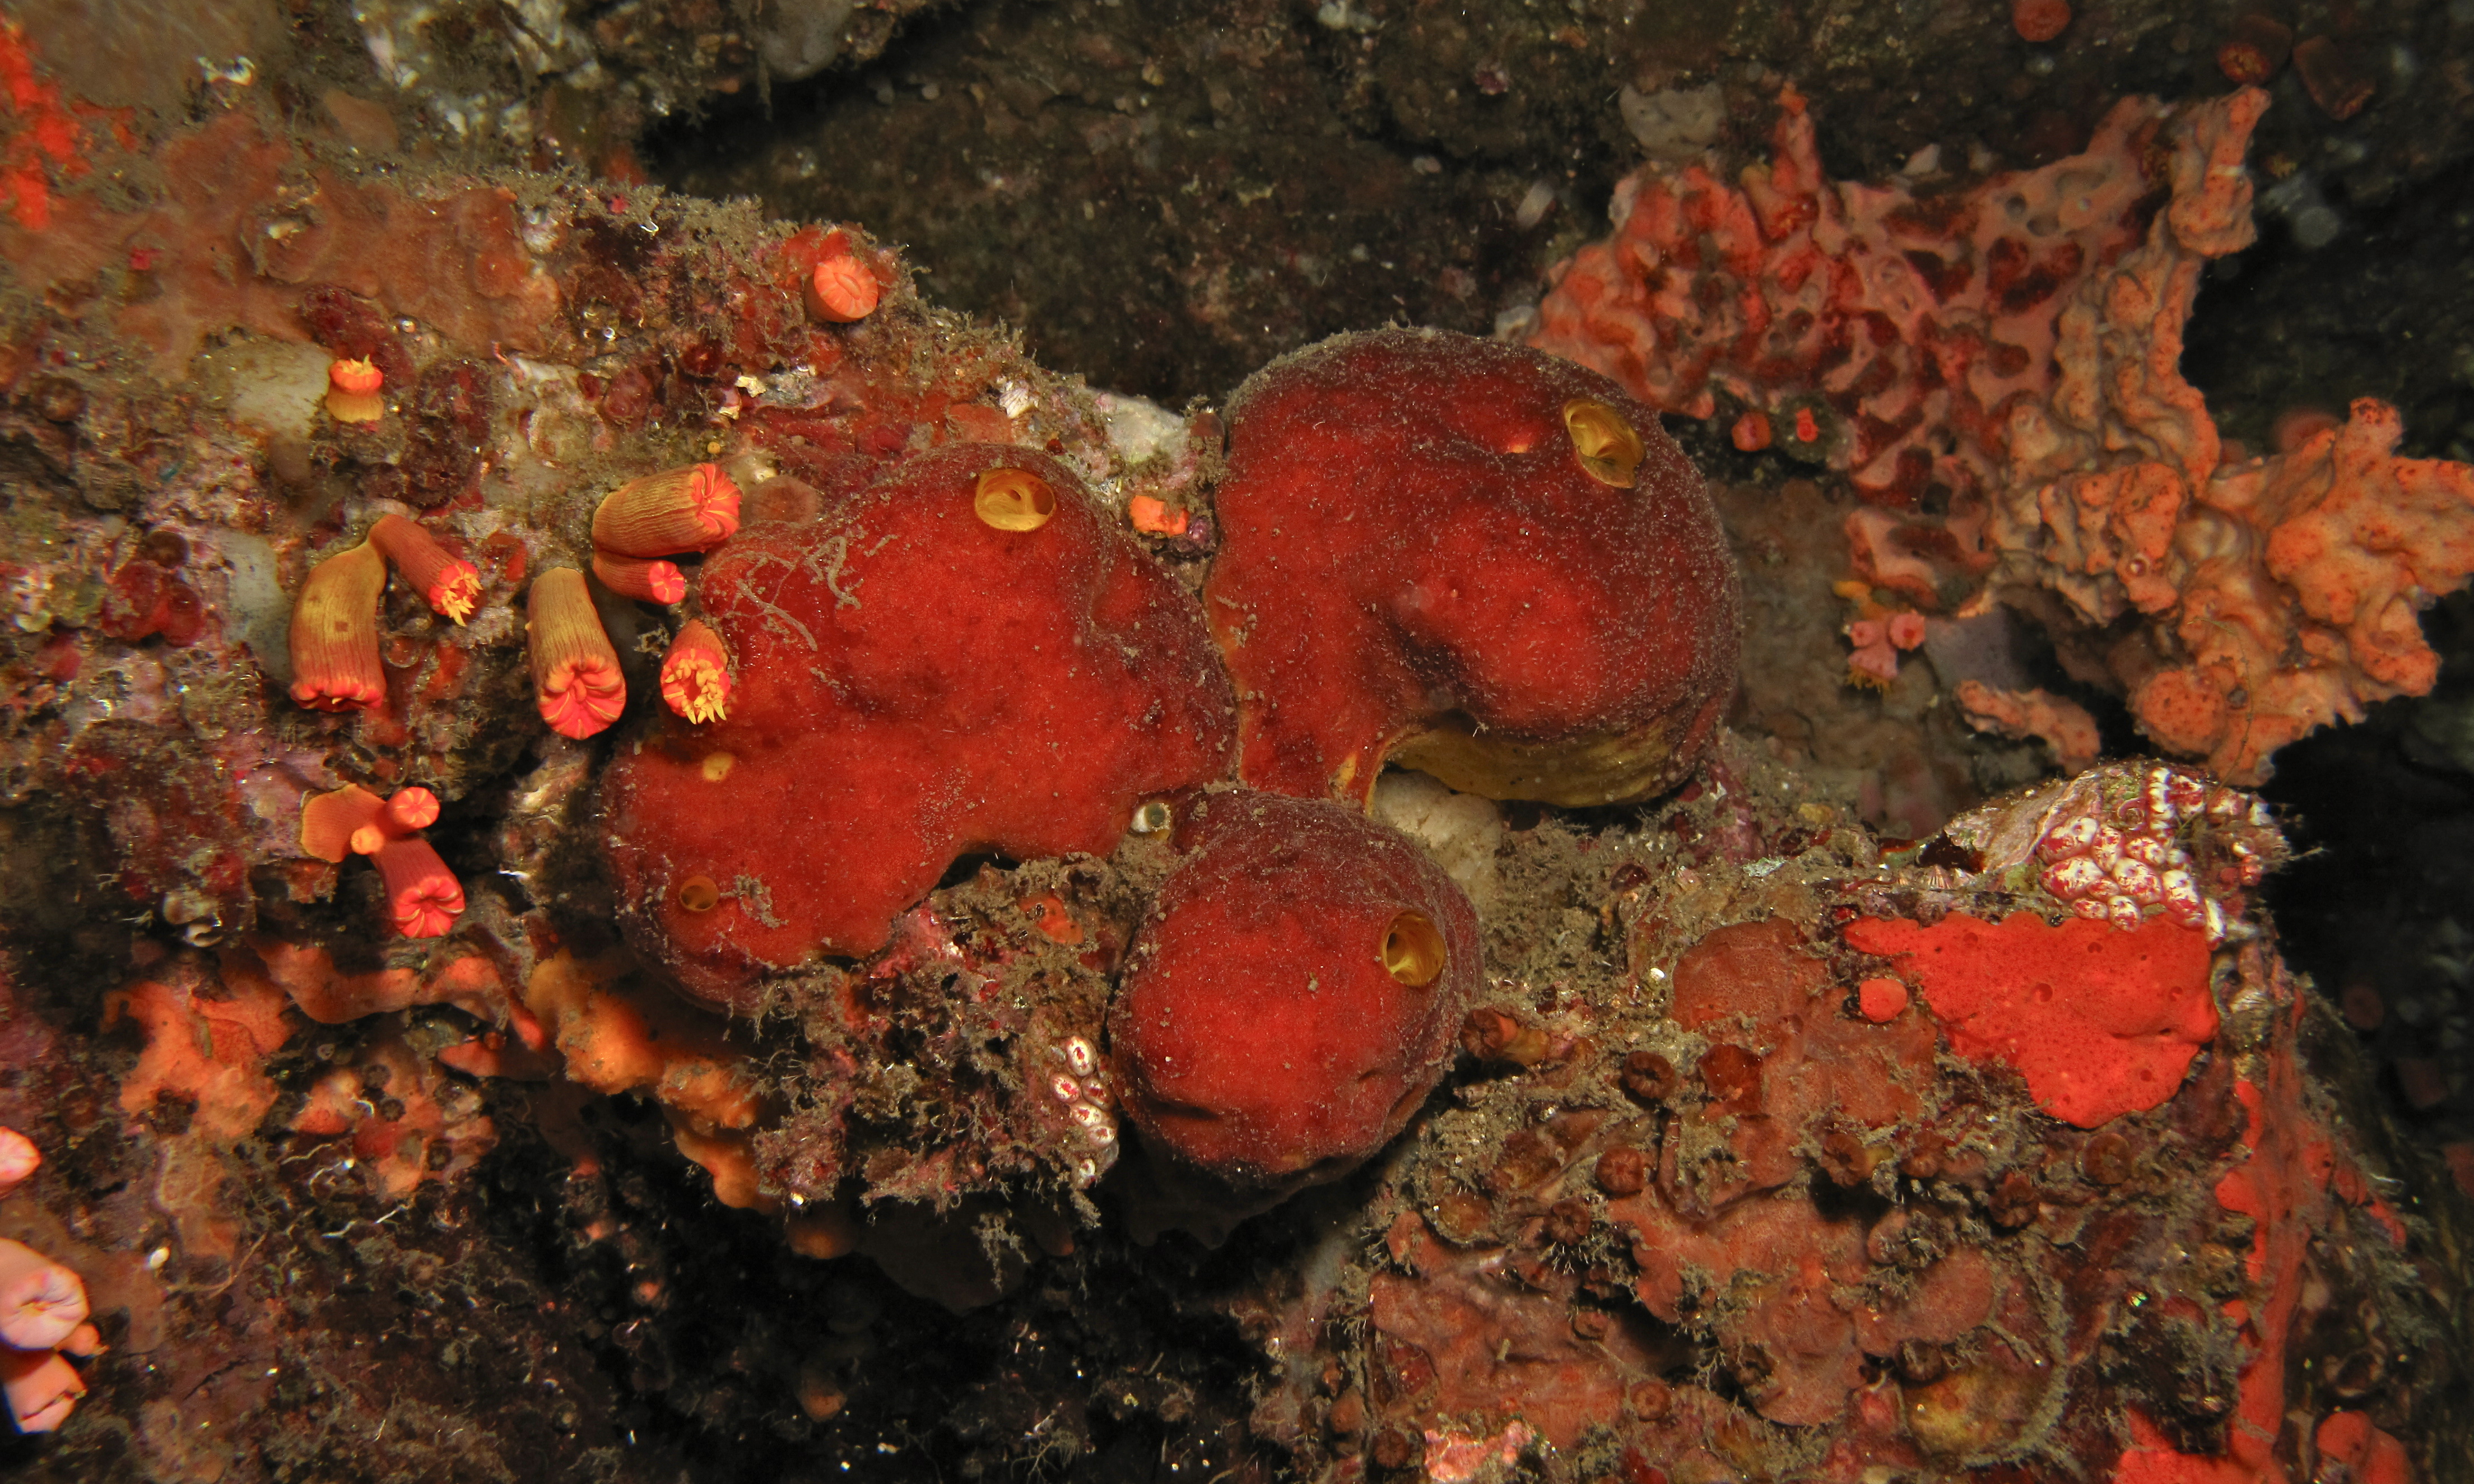 Photograph of calcareous sponge from family Leucettidae